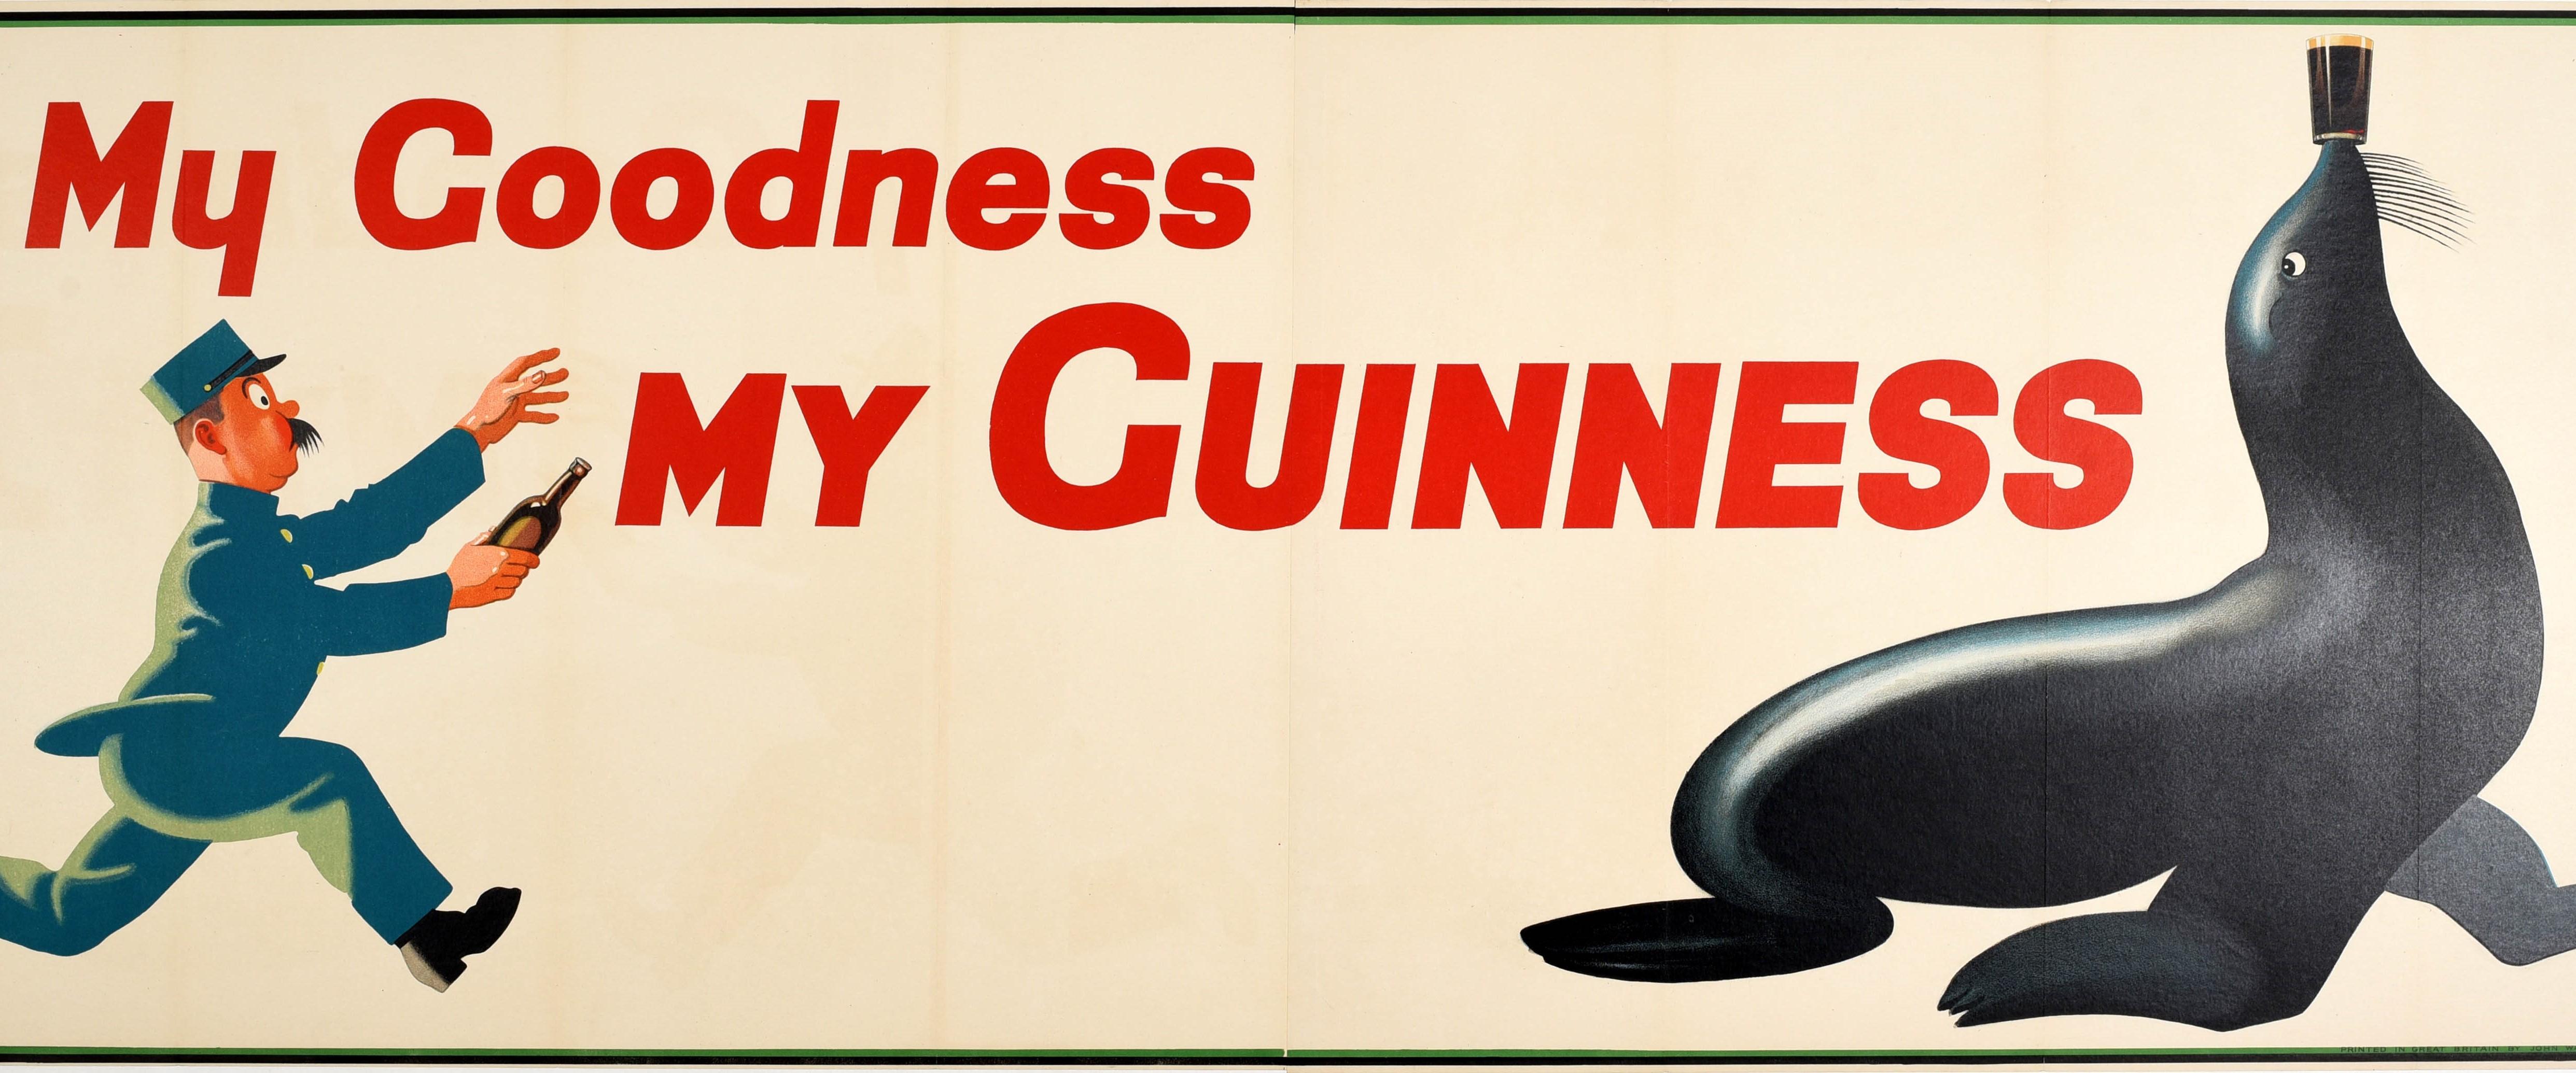 Original Vintage Drink Poster My Goodness My Guinness Zoo Keeper Sea Lion Design - Print by John Gilroy